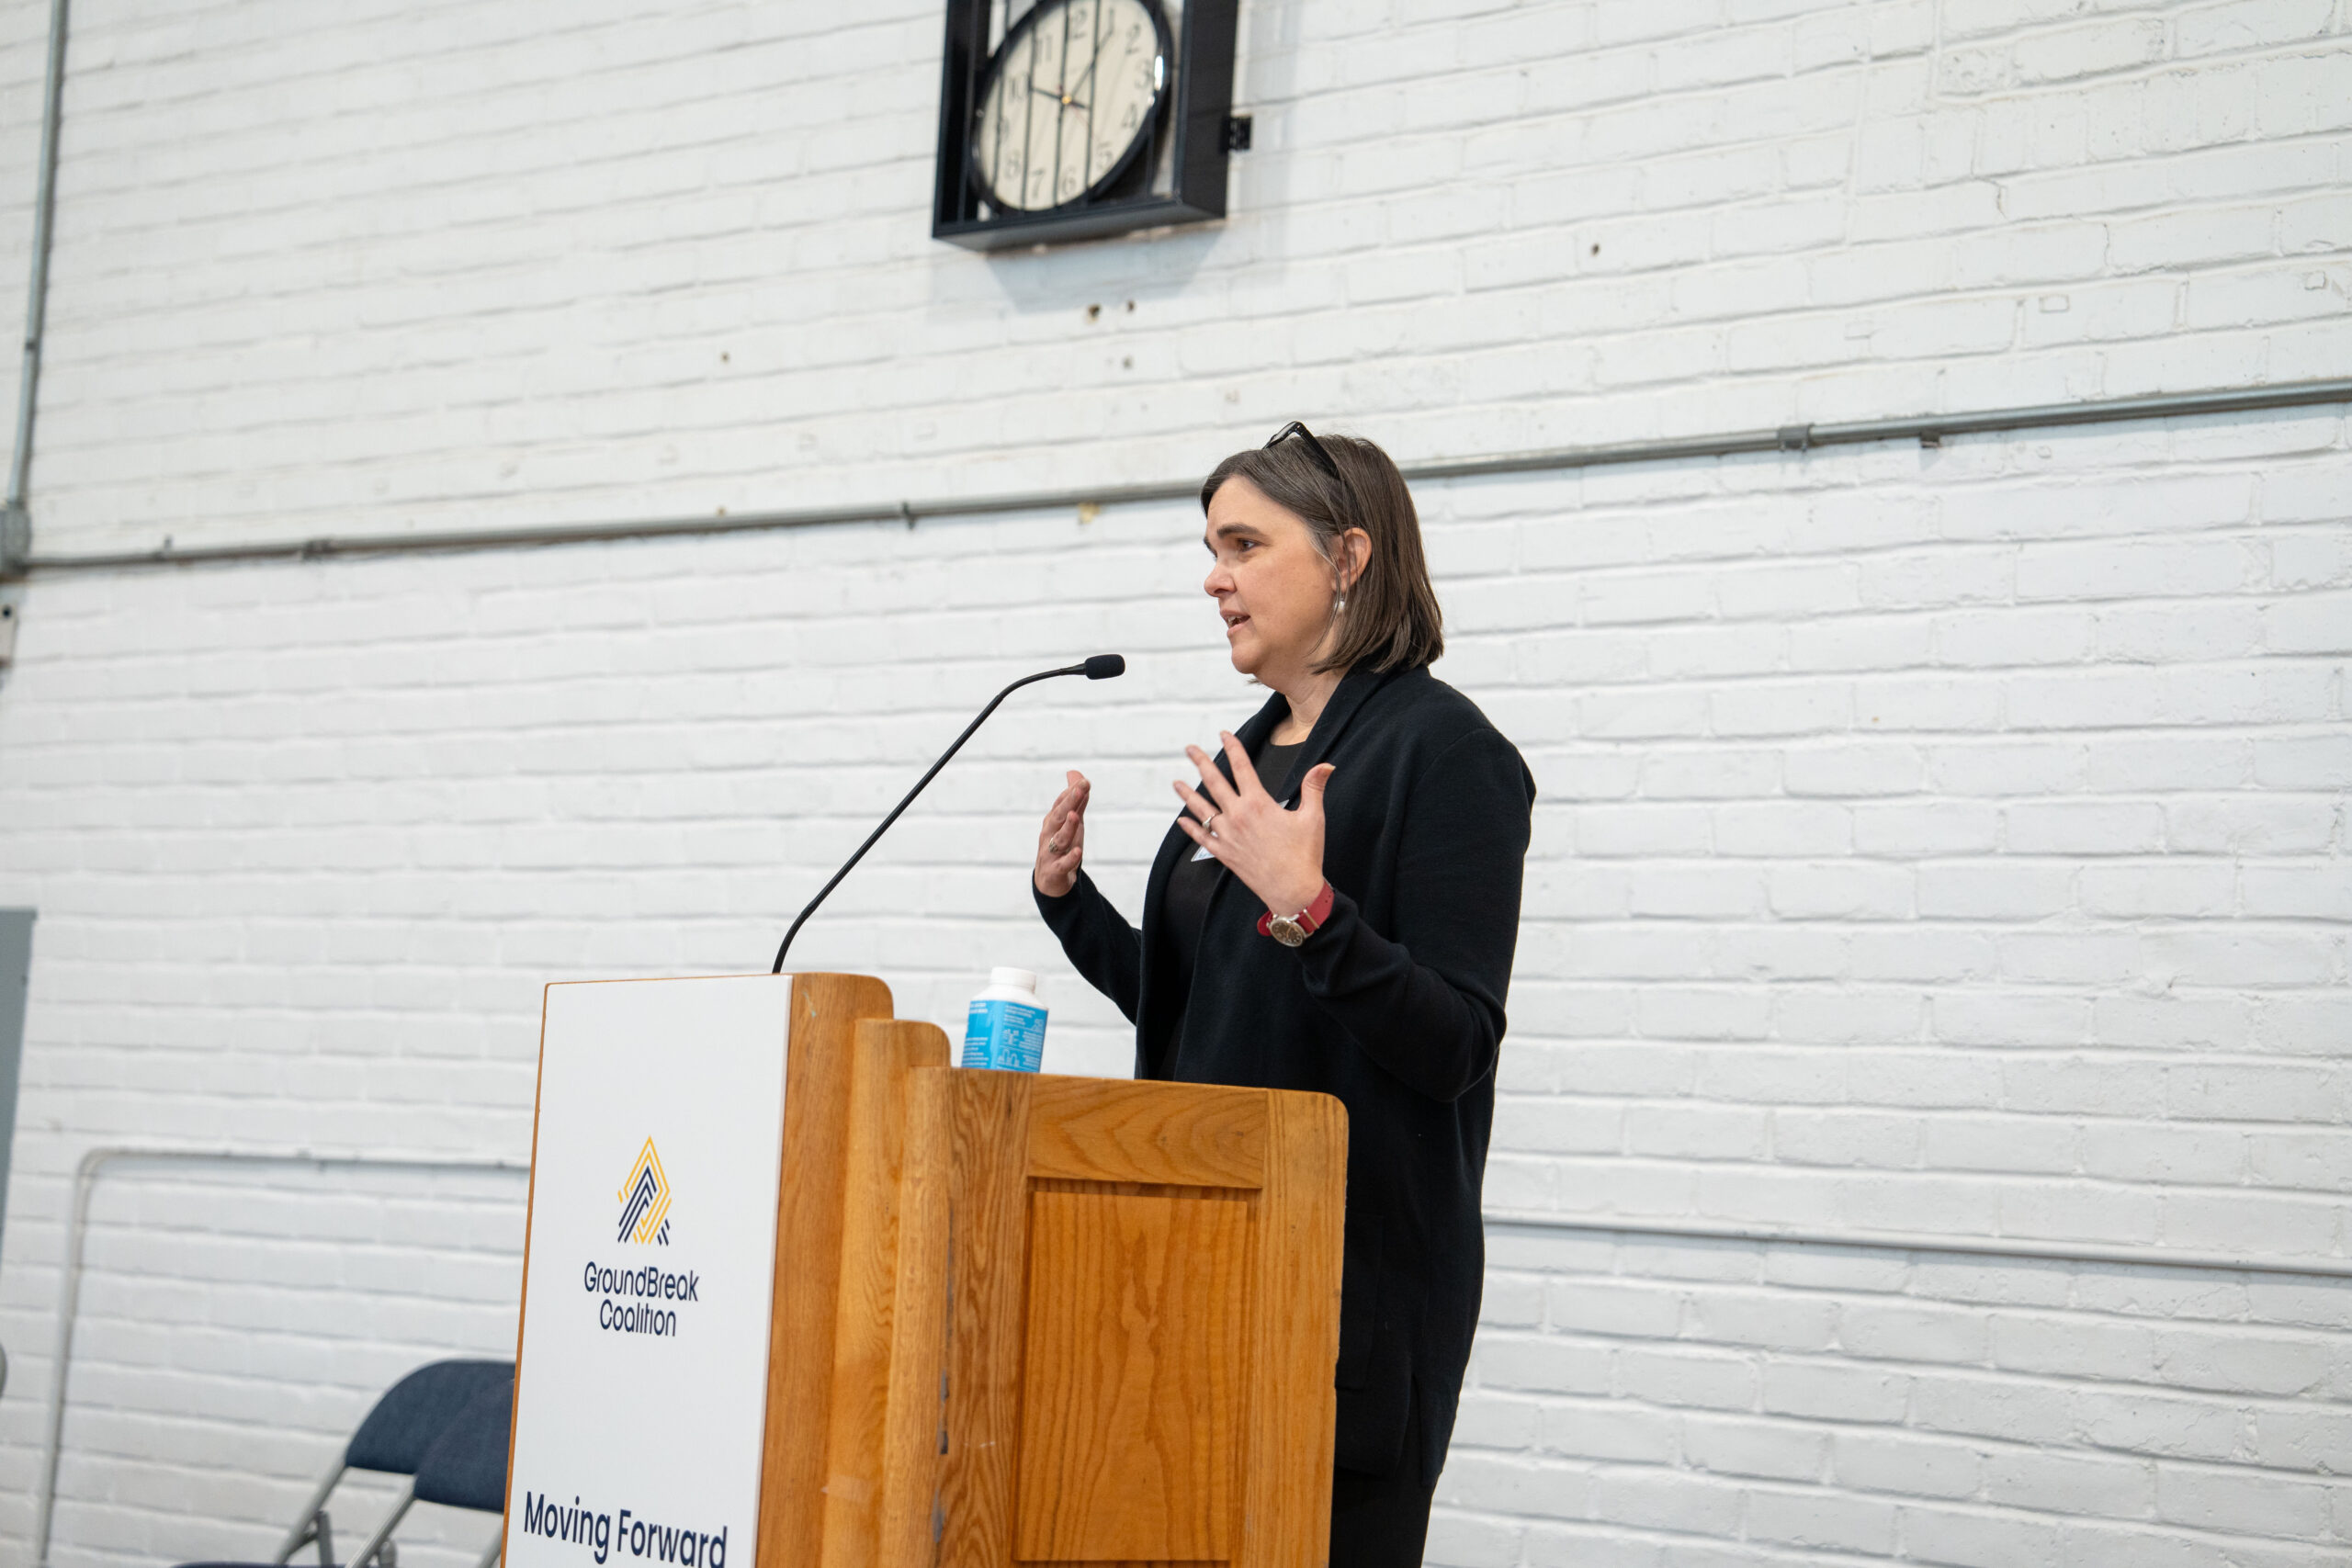 Jen Ford Reedy, President of the Bush Foundation, shares GroundBreak vision during Community Briefing